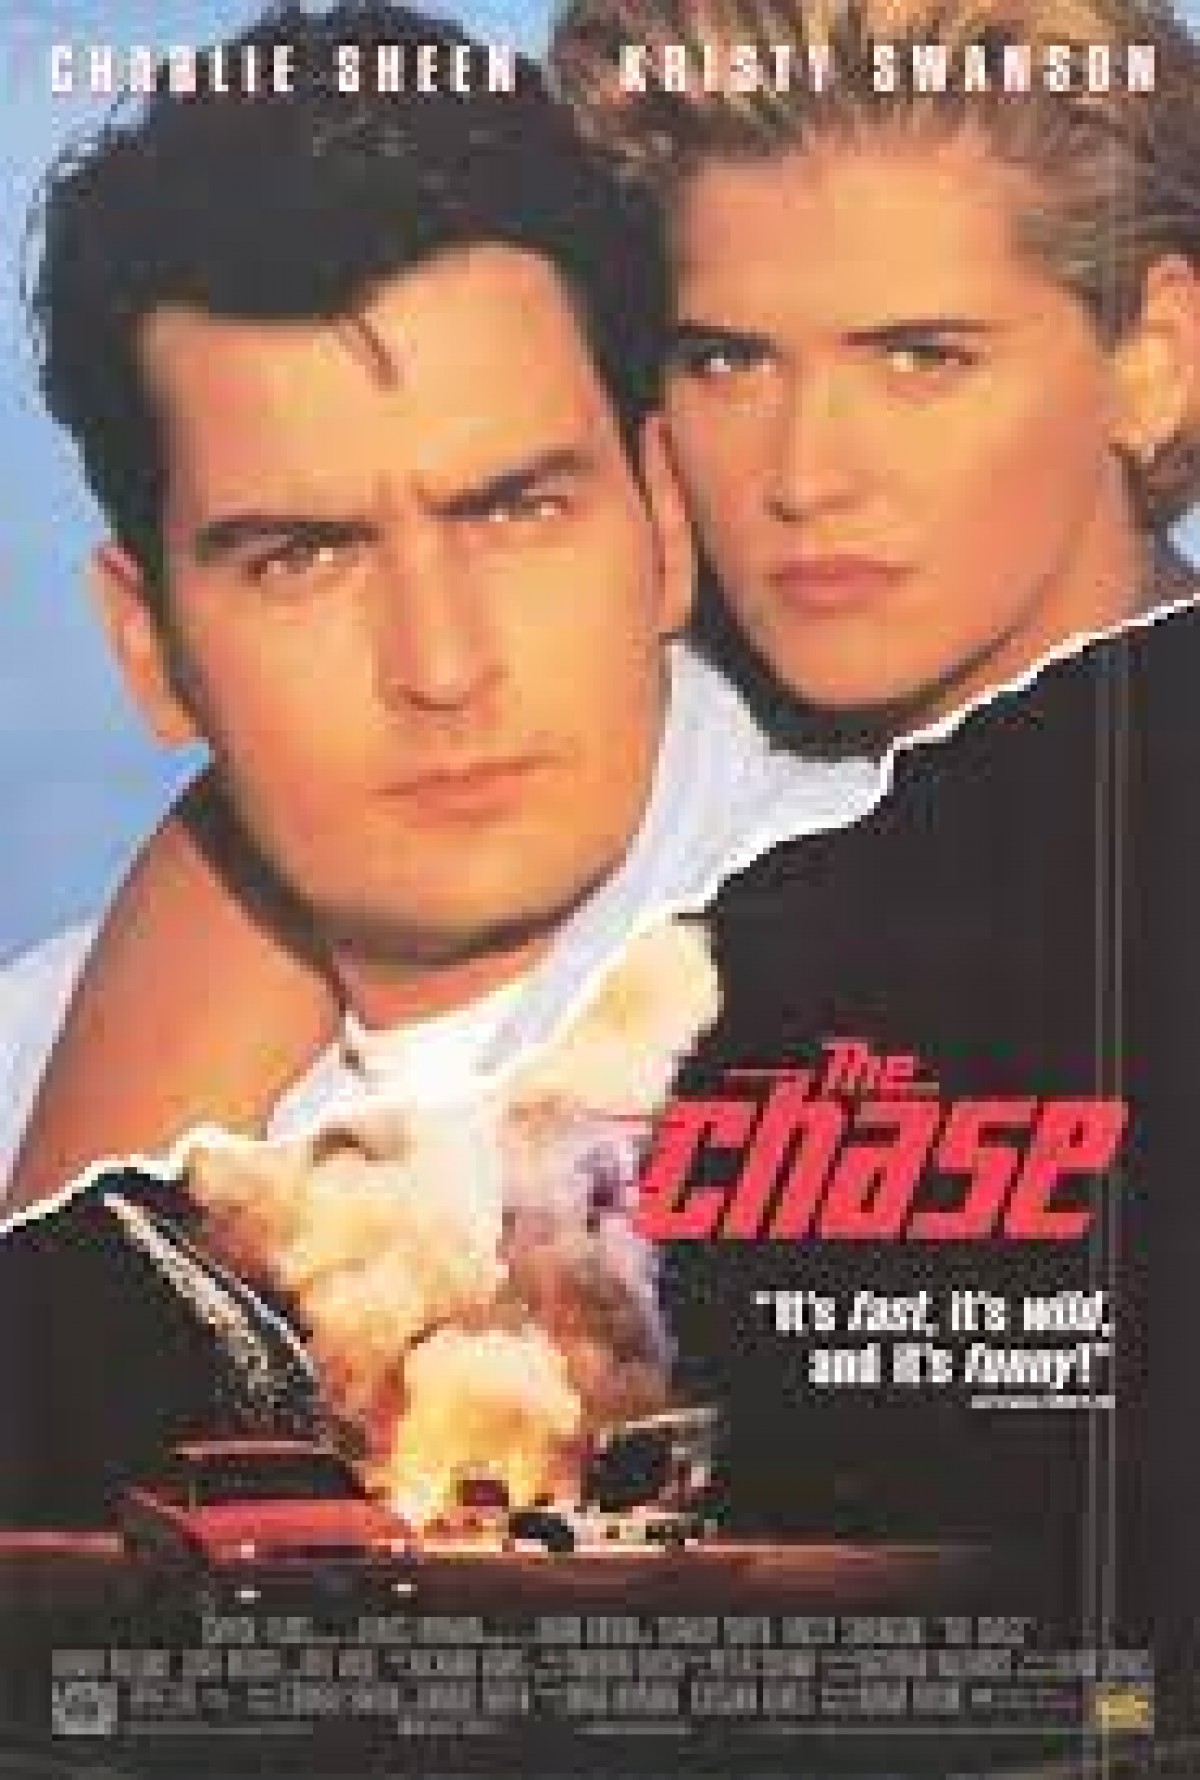 A toute allure (The Chase)